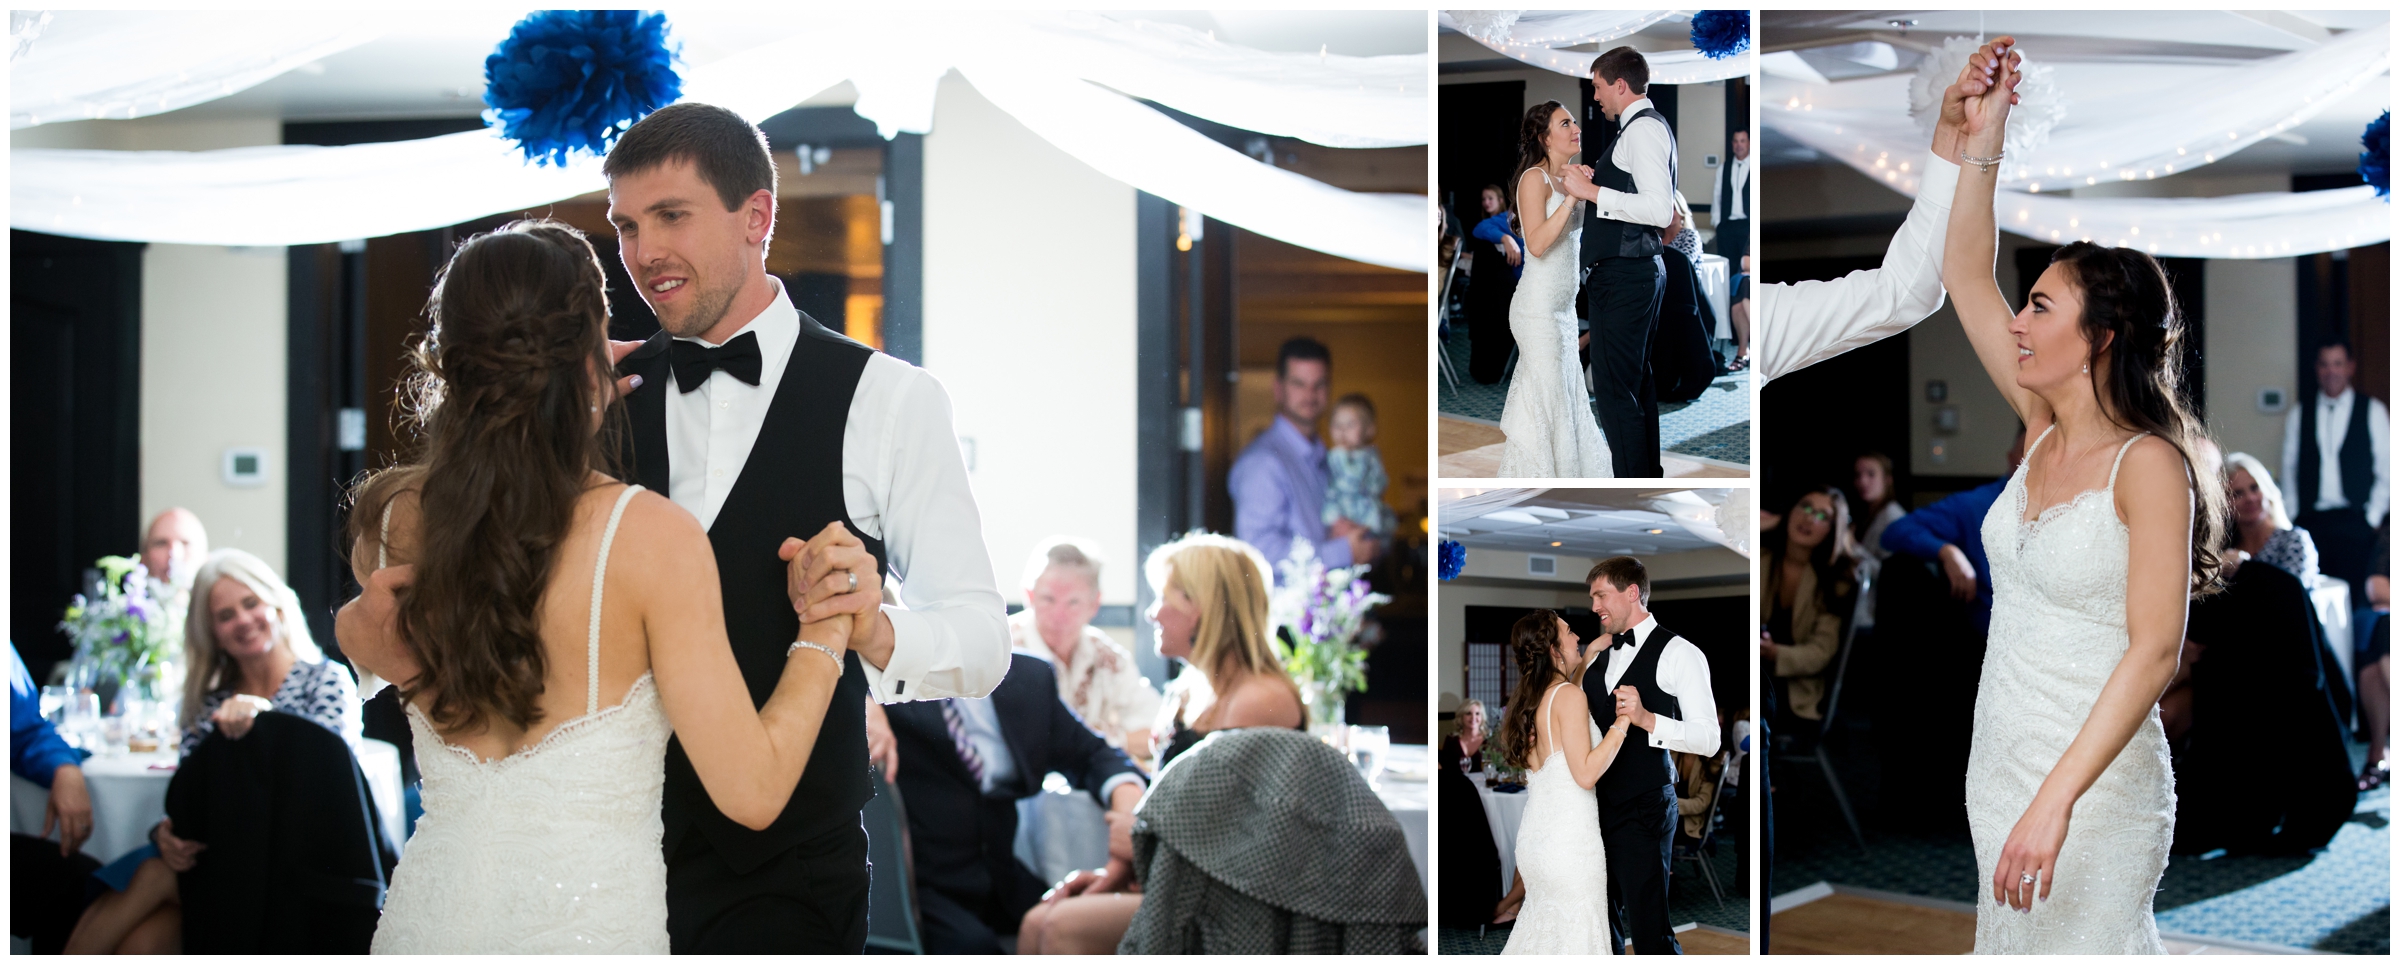 bride and groom first dance at Blue Sky Breck reception 